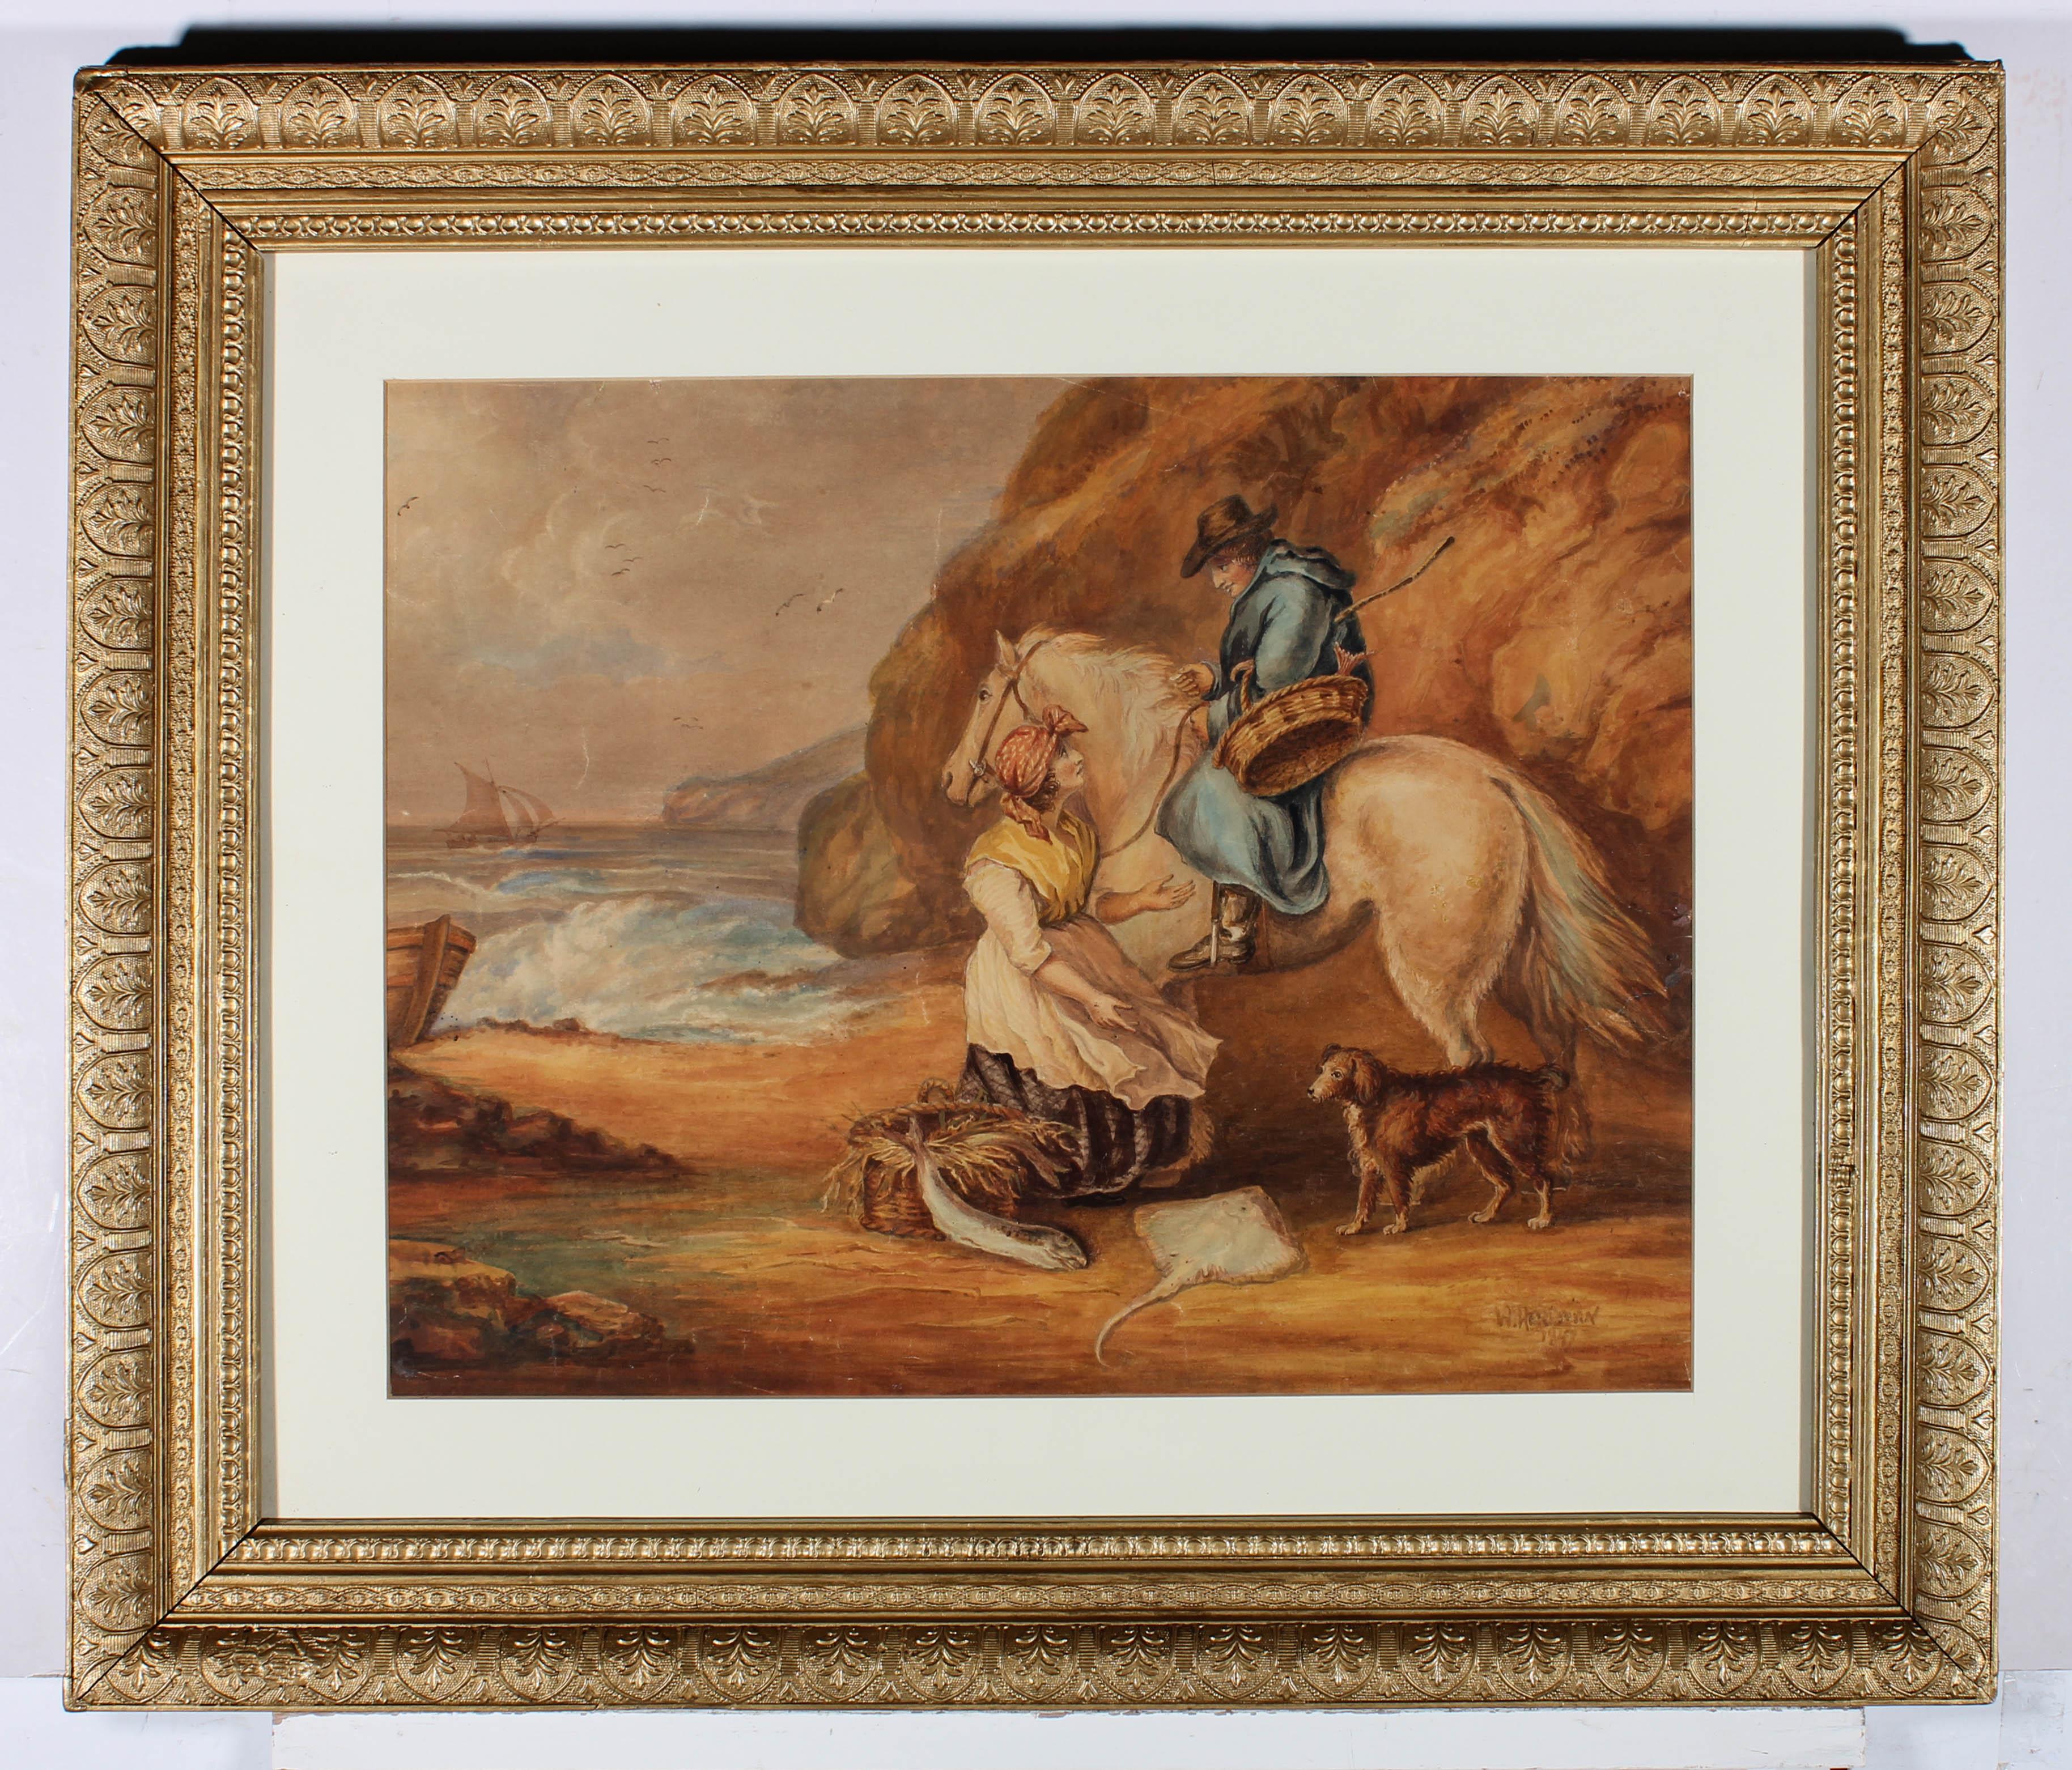 This charming watercolour scene is after George Moorland's original oil painting depicting a woman trying to sell fish to a man on horseback. A small terrier dog looks at the array of fish that spill from the woman's baskets as she reaches up to